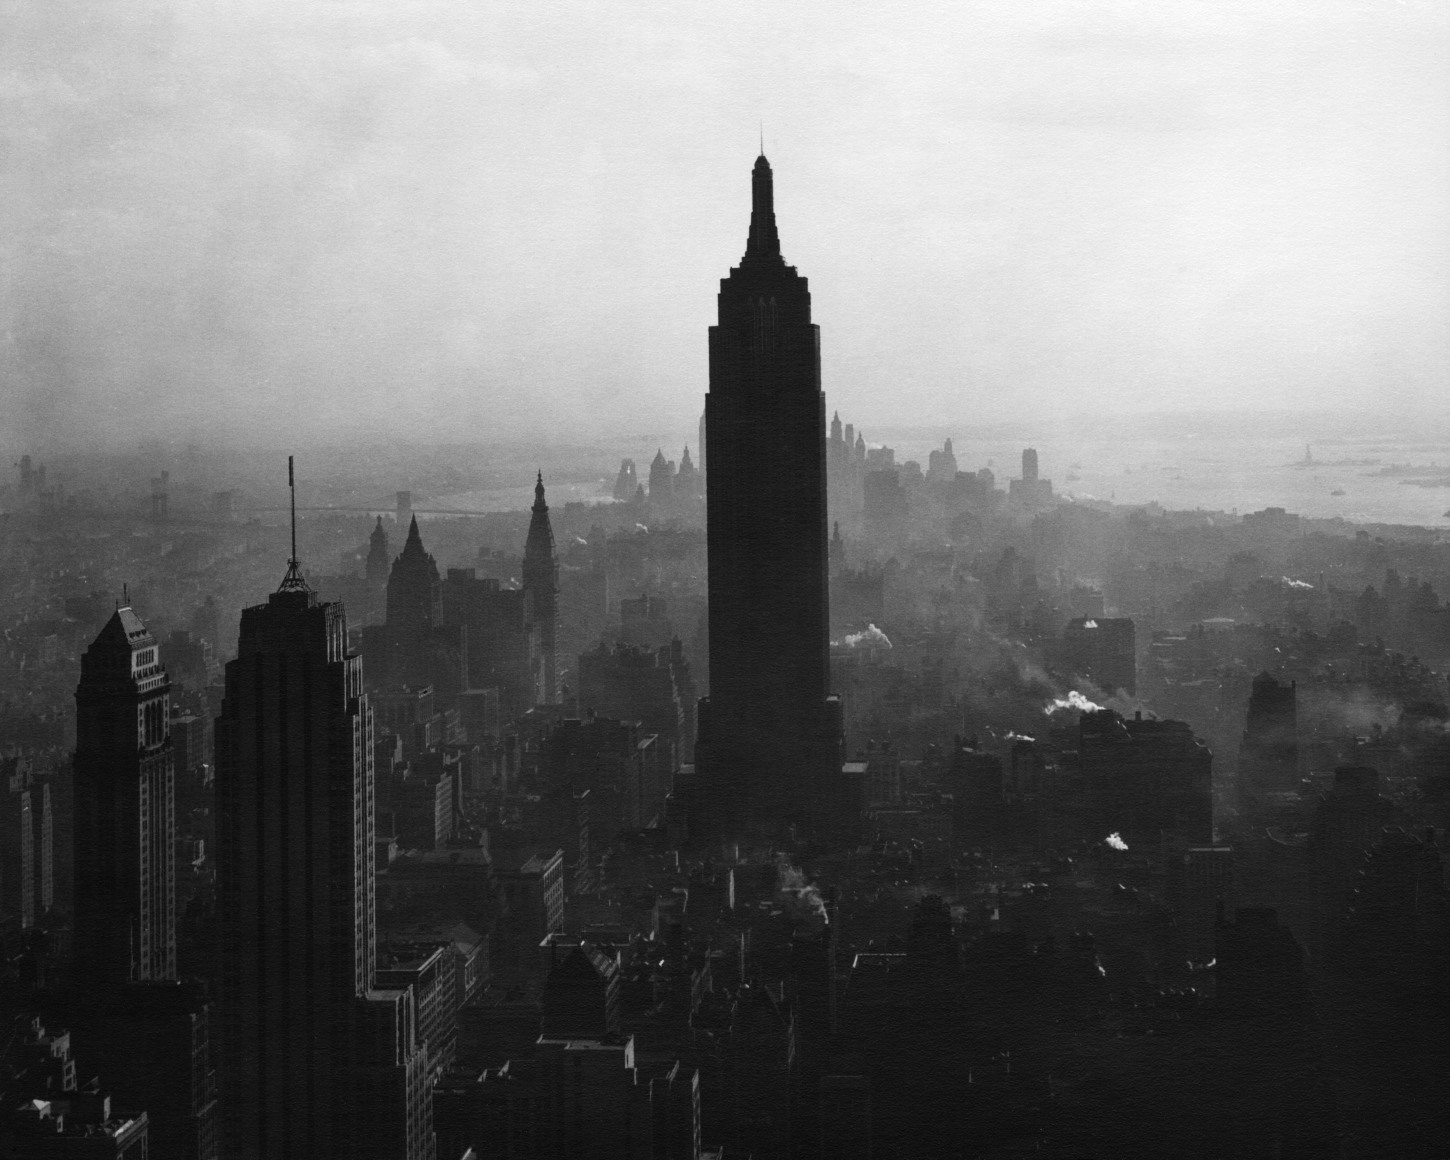 53. Todd Webb, View South from the top of the RCA Building showing the Empire State Building, ​1947. Birds-eye view of a hazy skyline with the Empire State Building as the central silhouette.